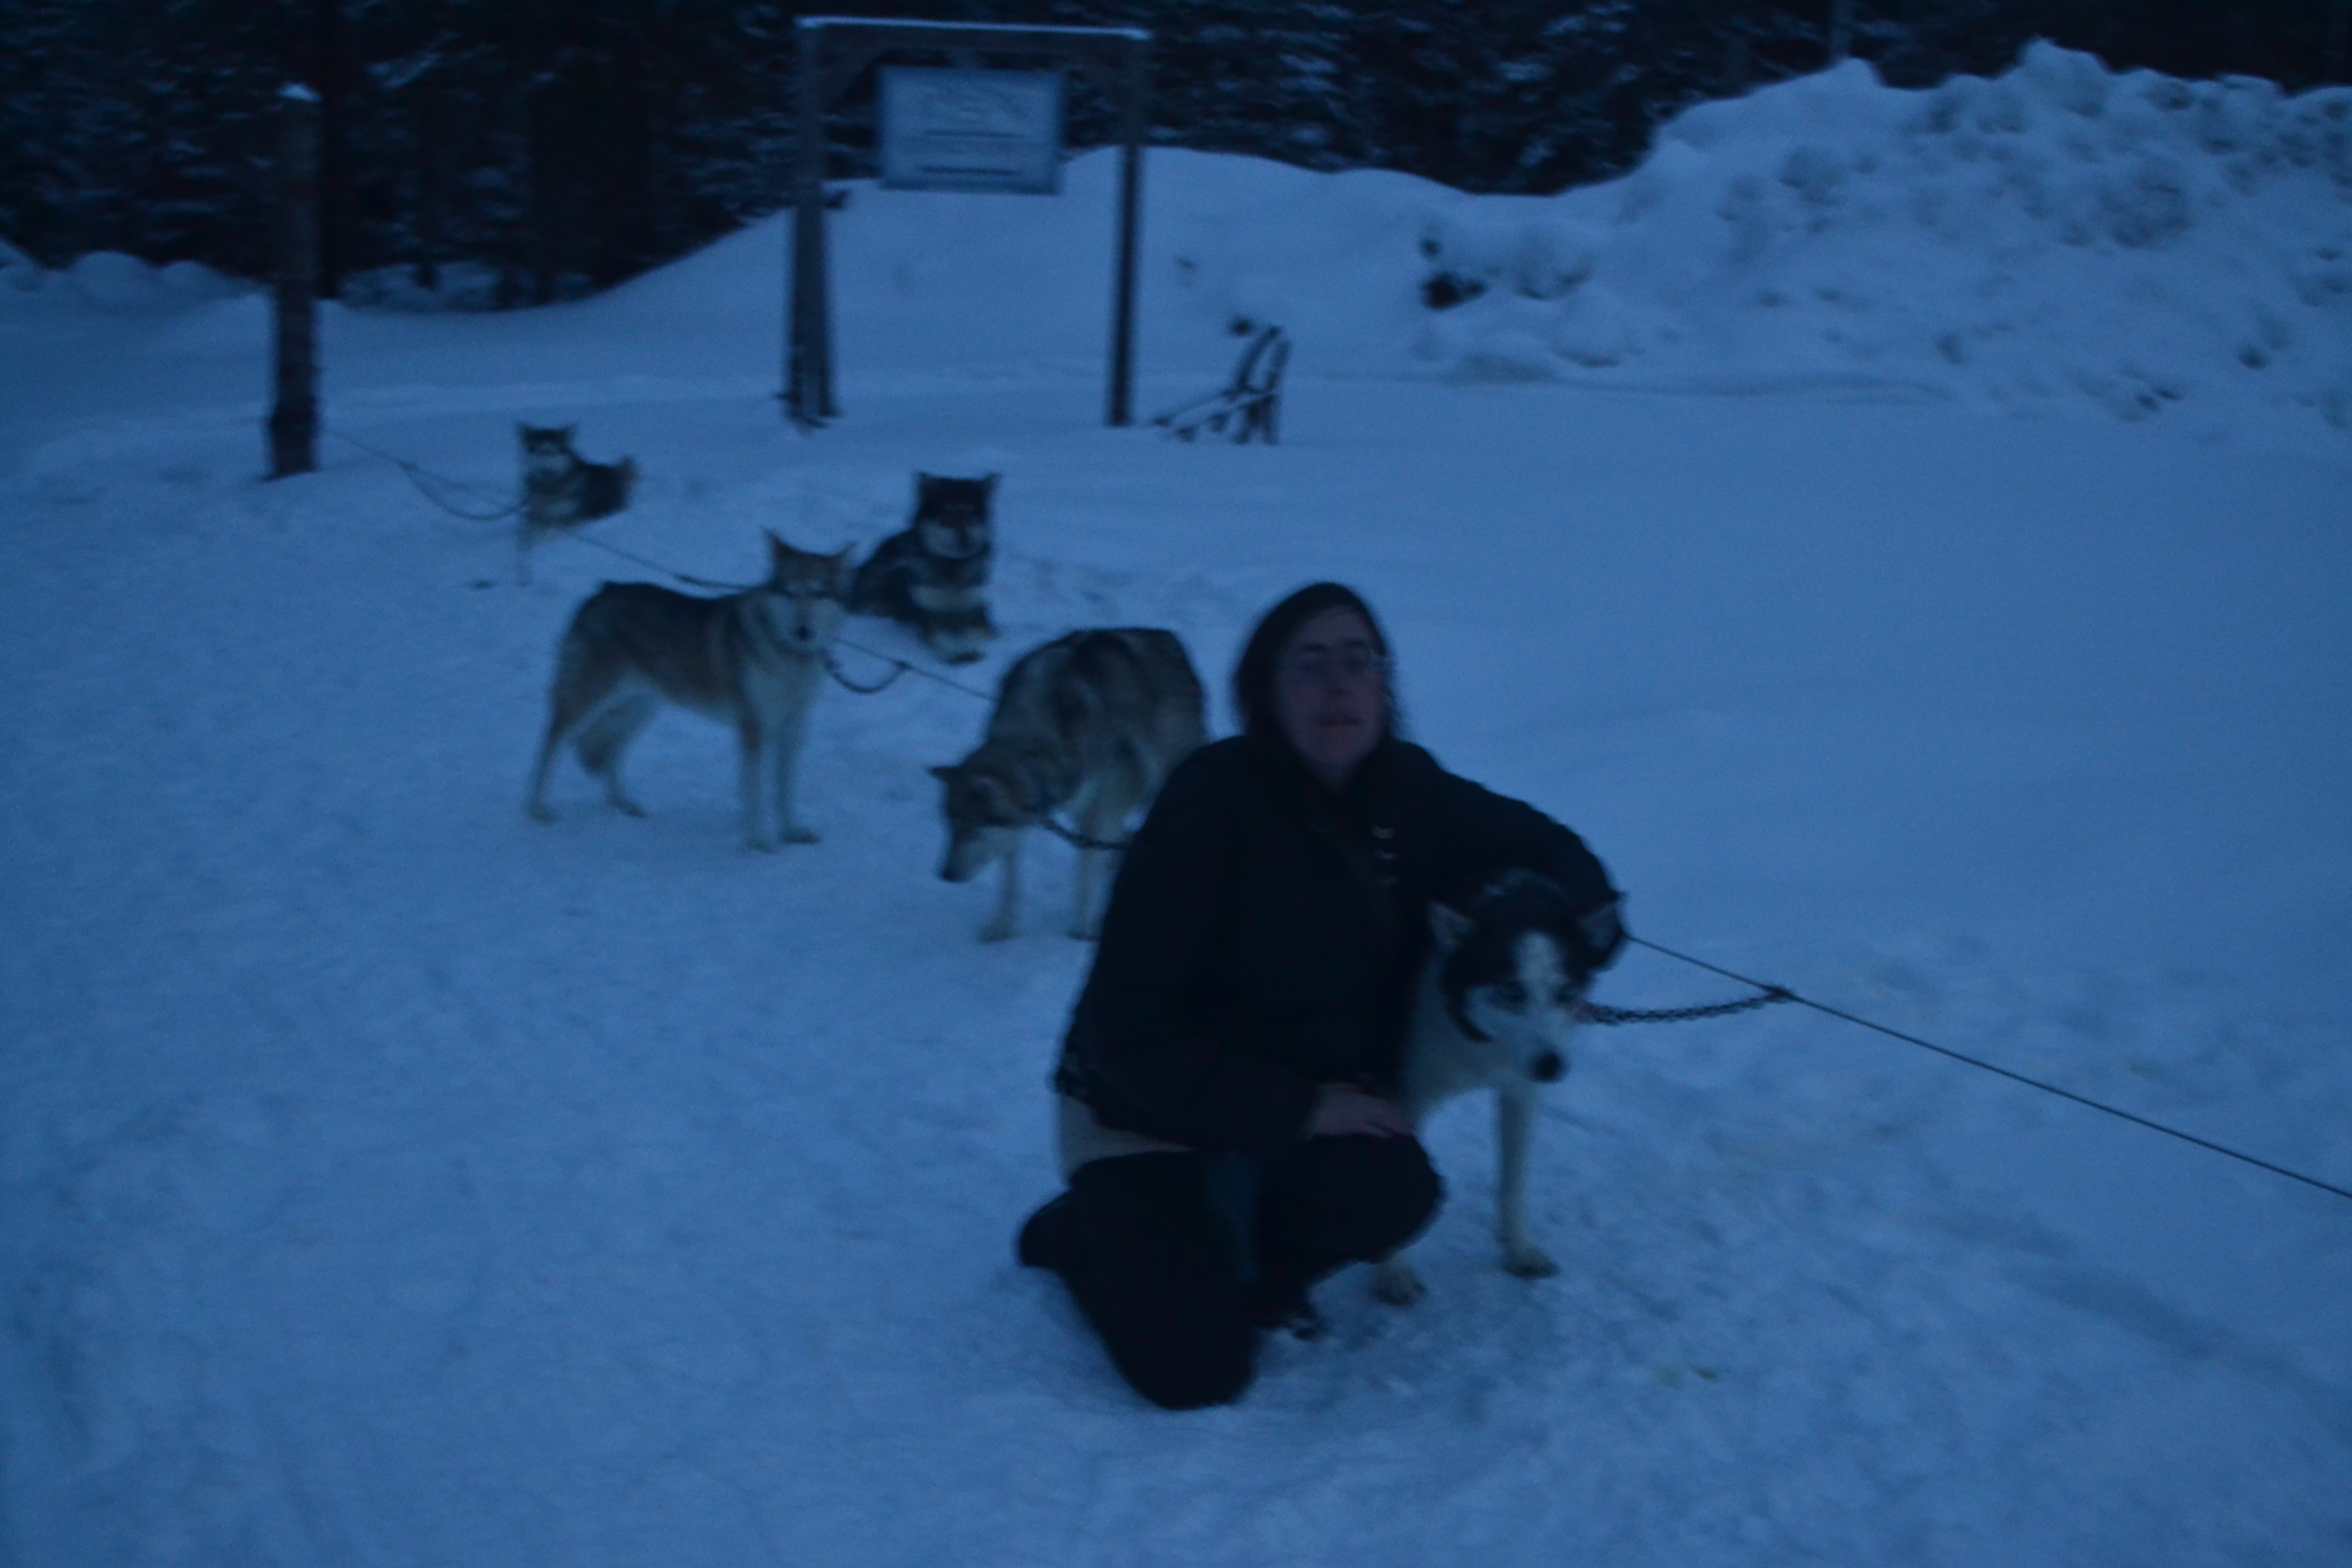 Author with sled dogs